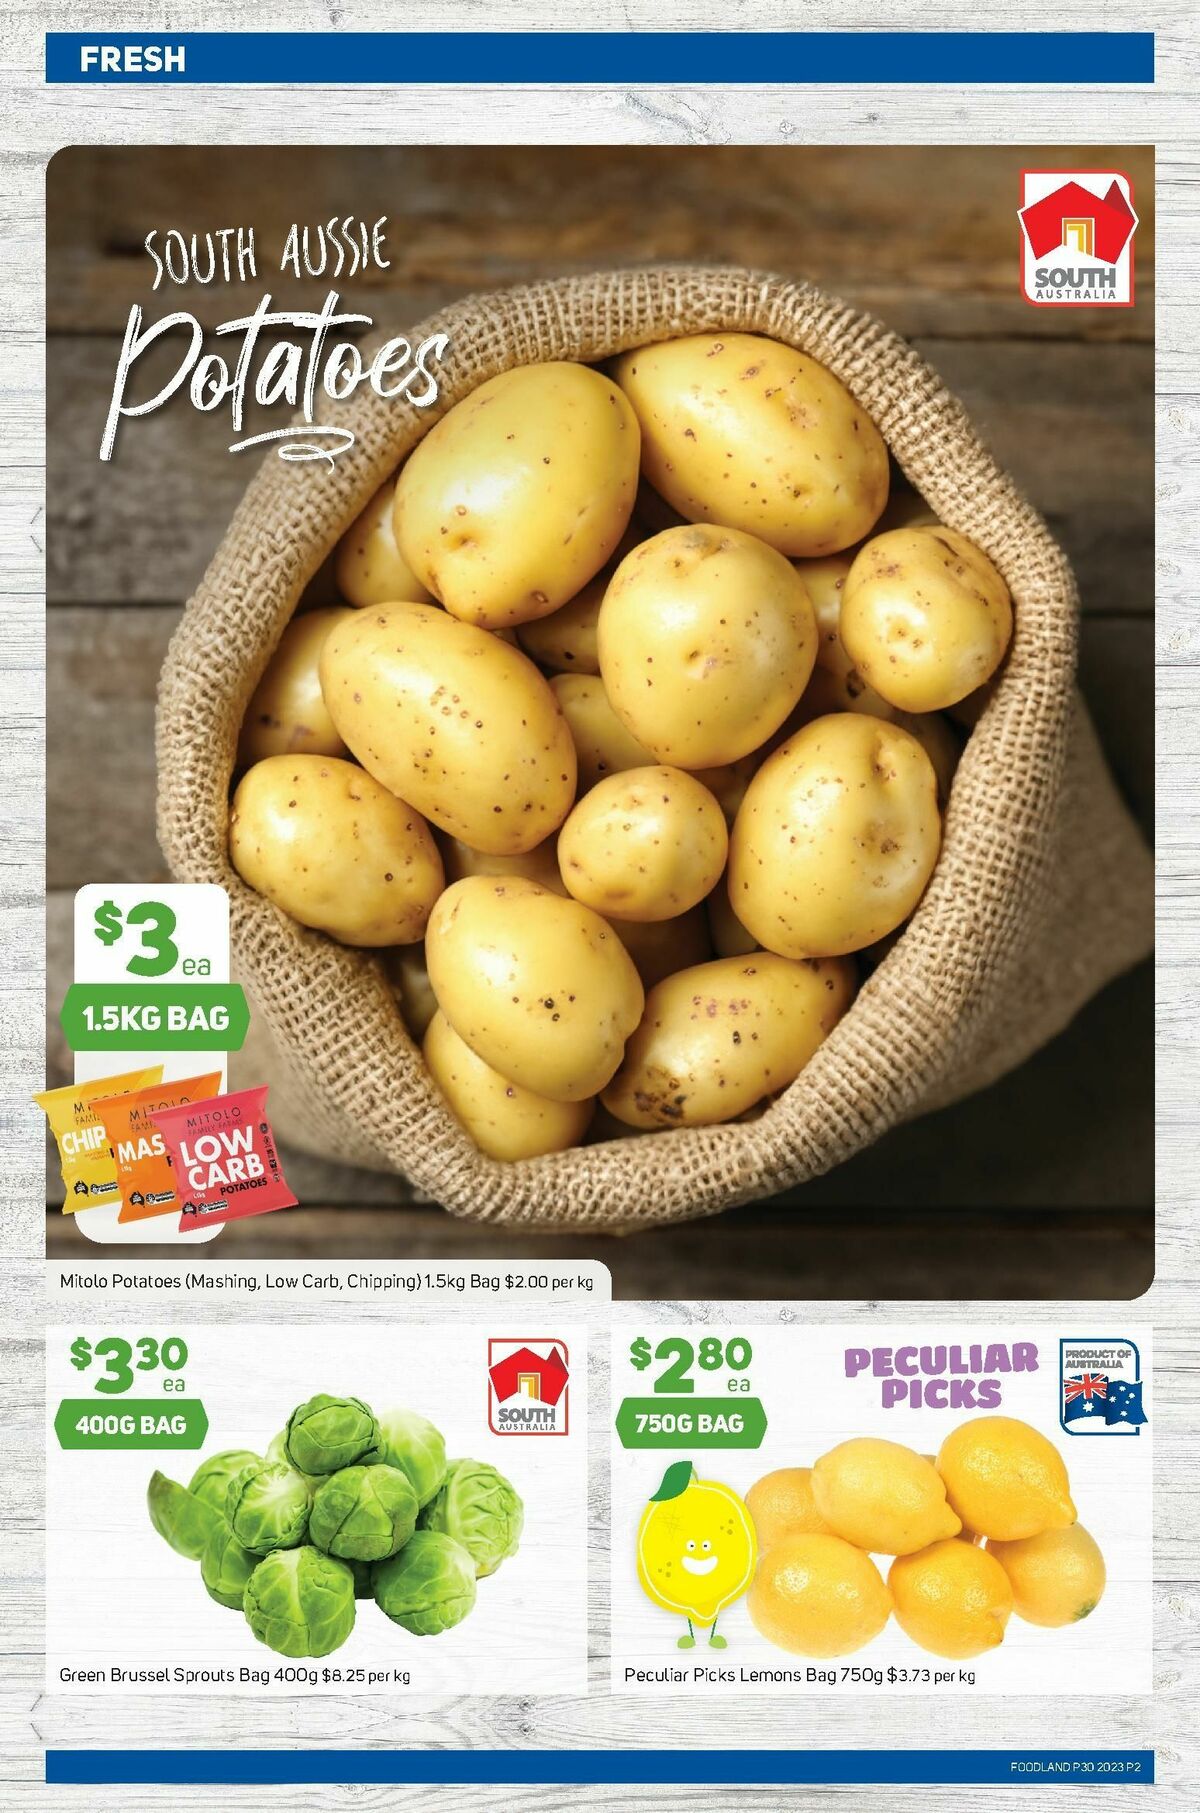 Foodland Catalogues from 2 August